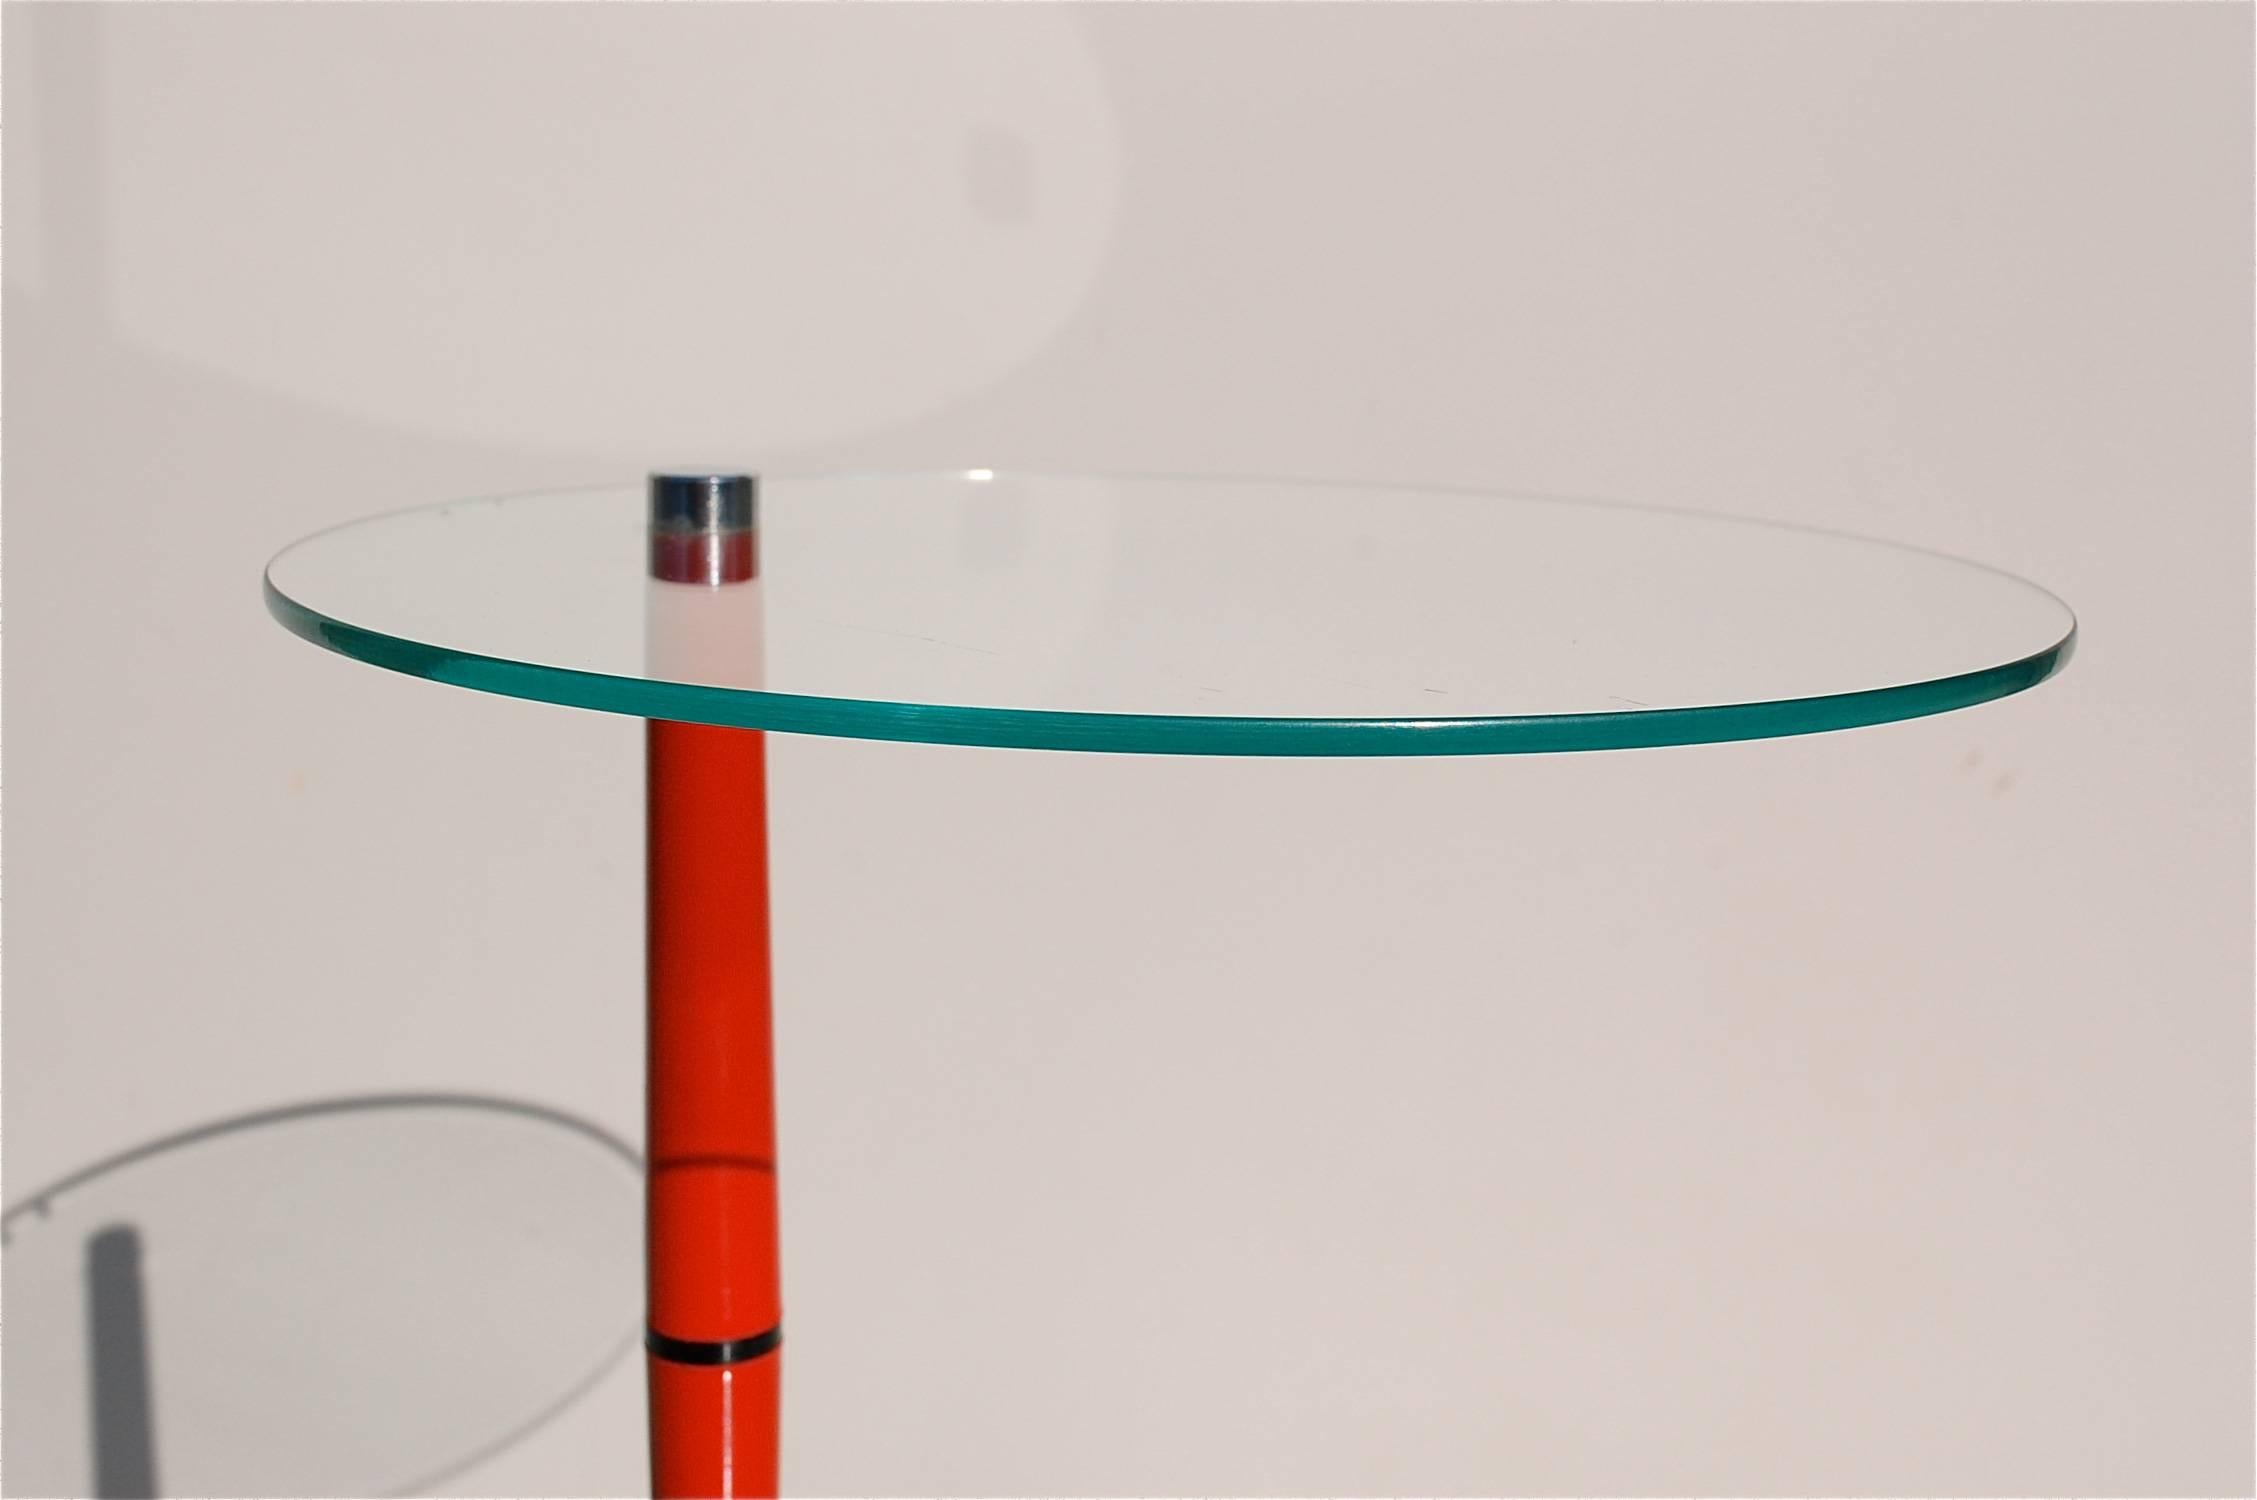 Mid-Century Modern Glass Side Table with Bright Colored Legs, Mid-20th Century, Italy